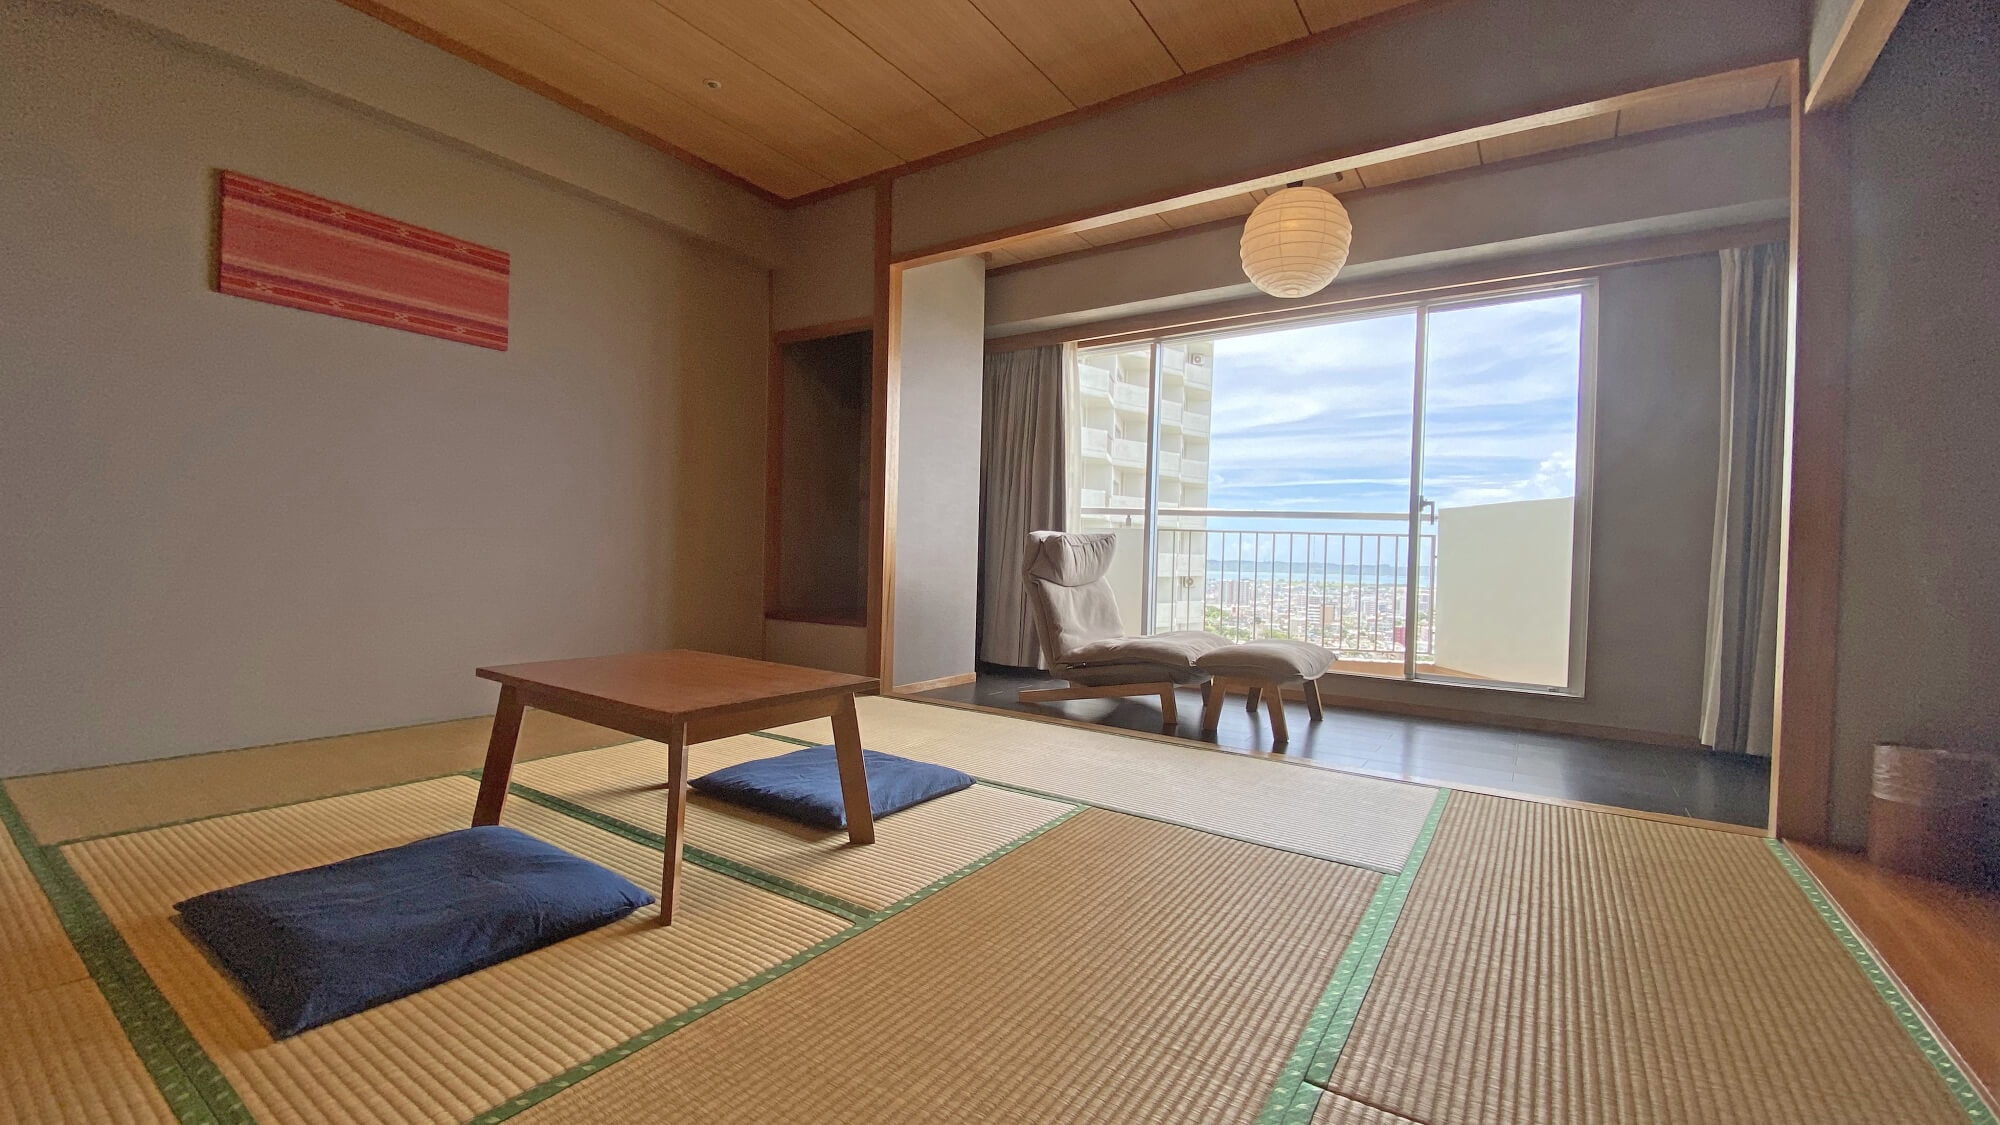  ■ Japanese-style room